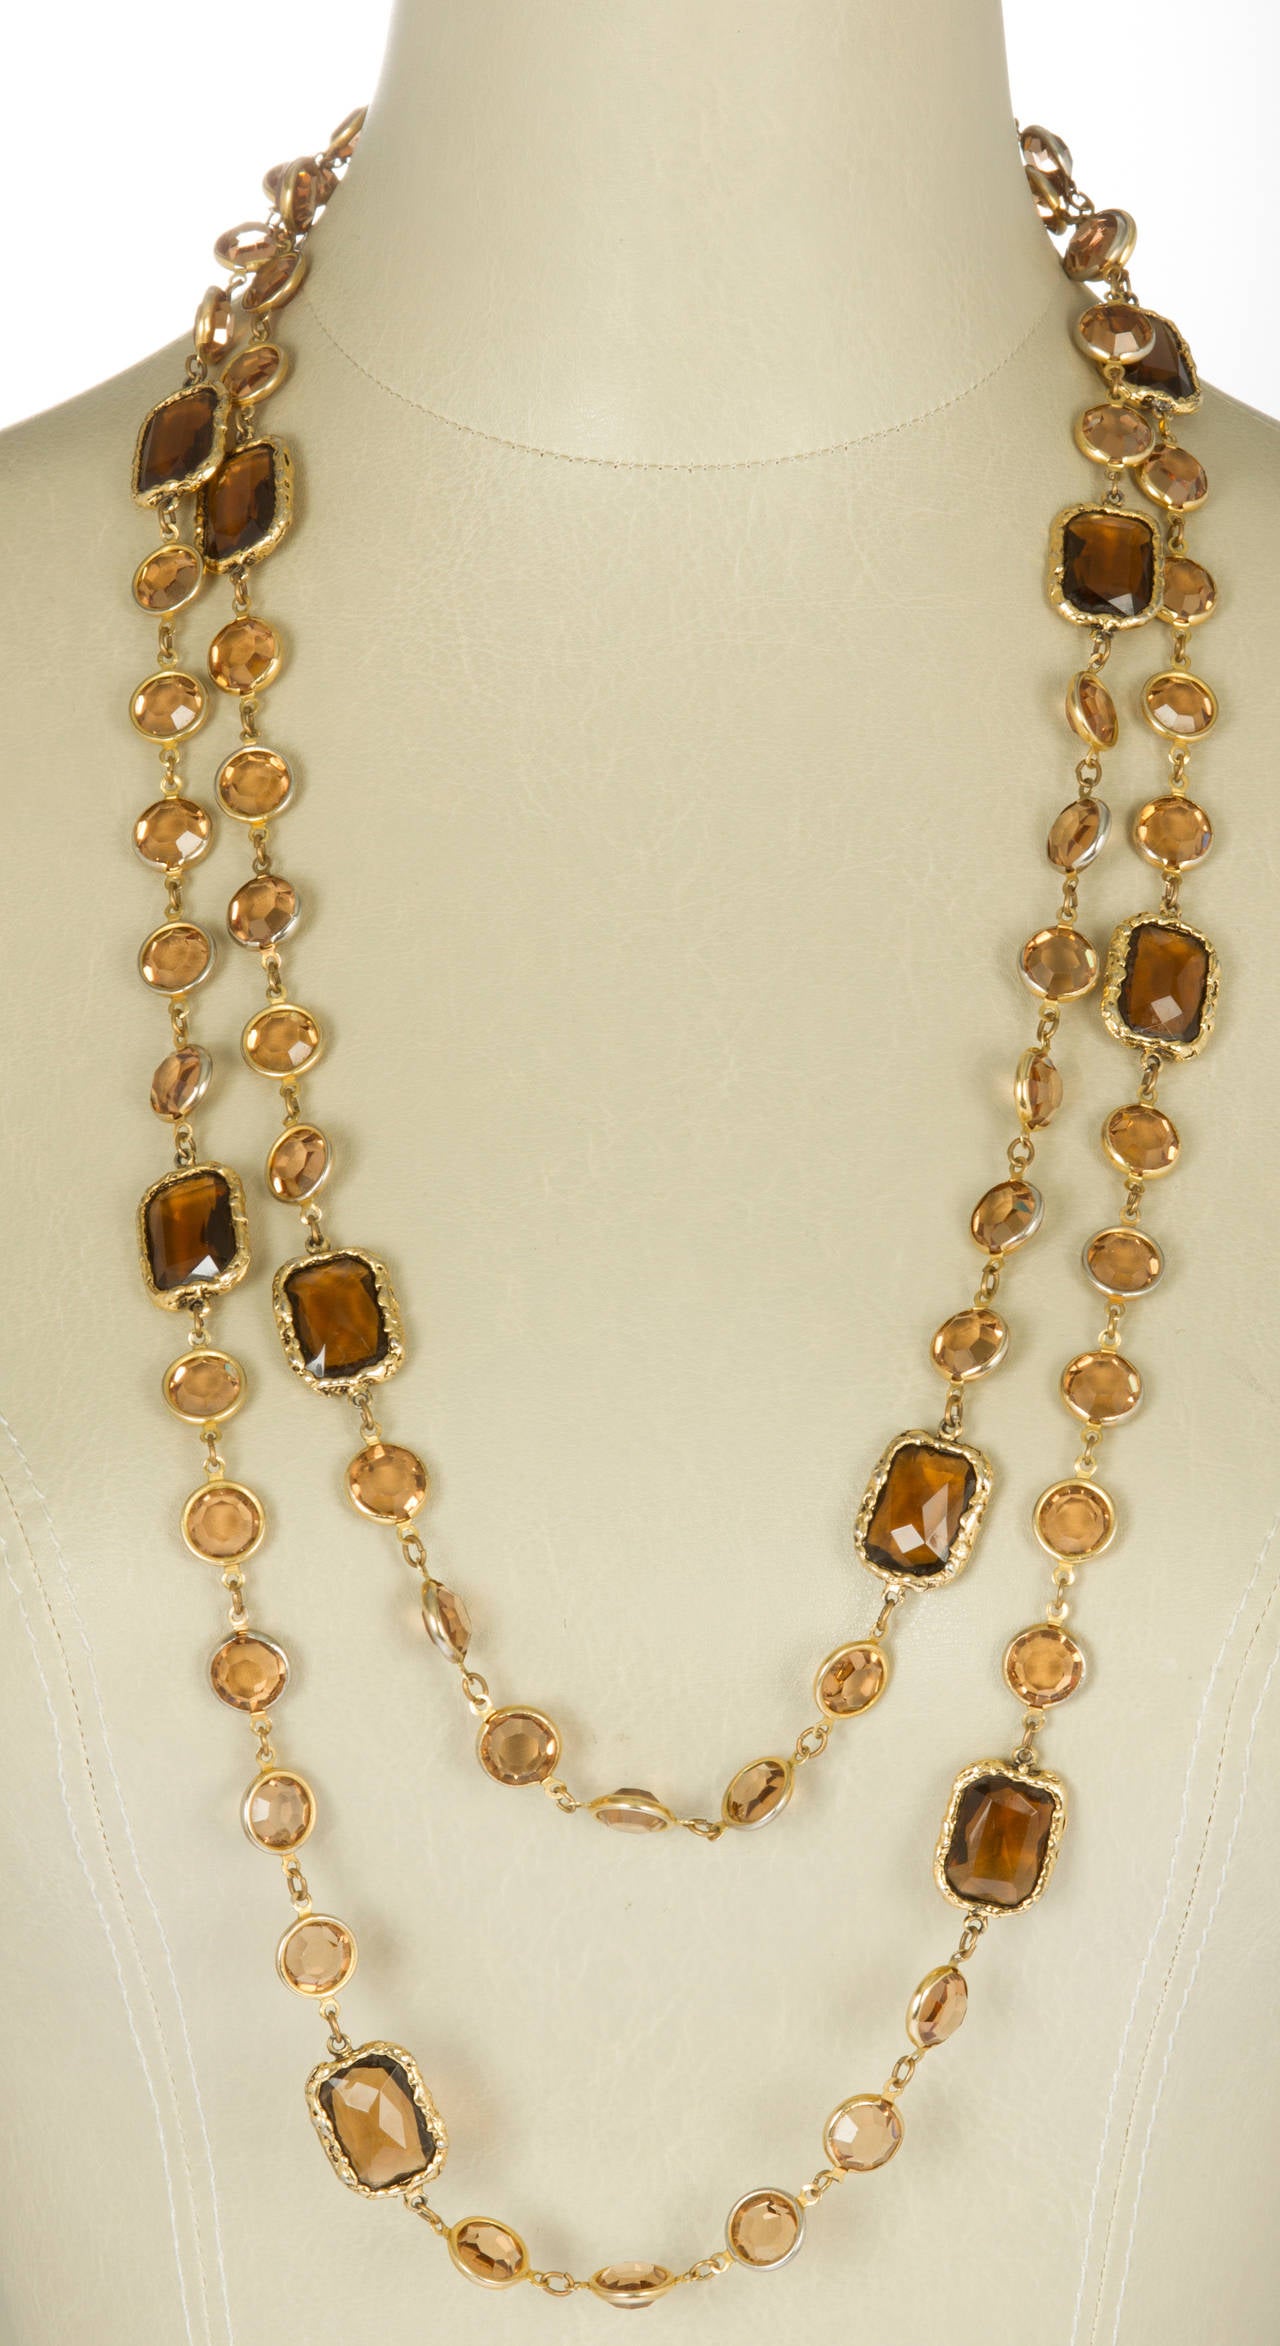 This is an unusual colored chicklet necklace, the color of the crystal is close to a smokey quartz or topaz.